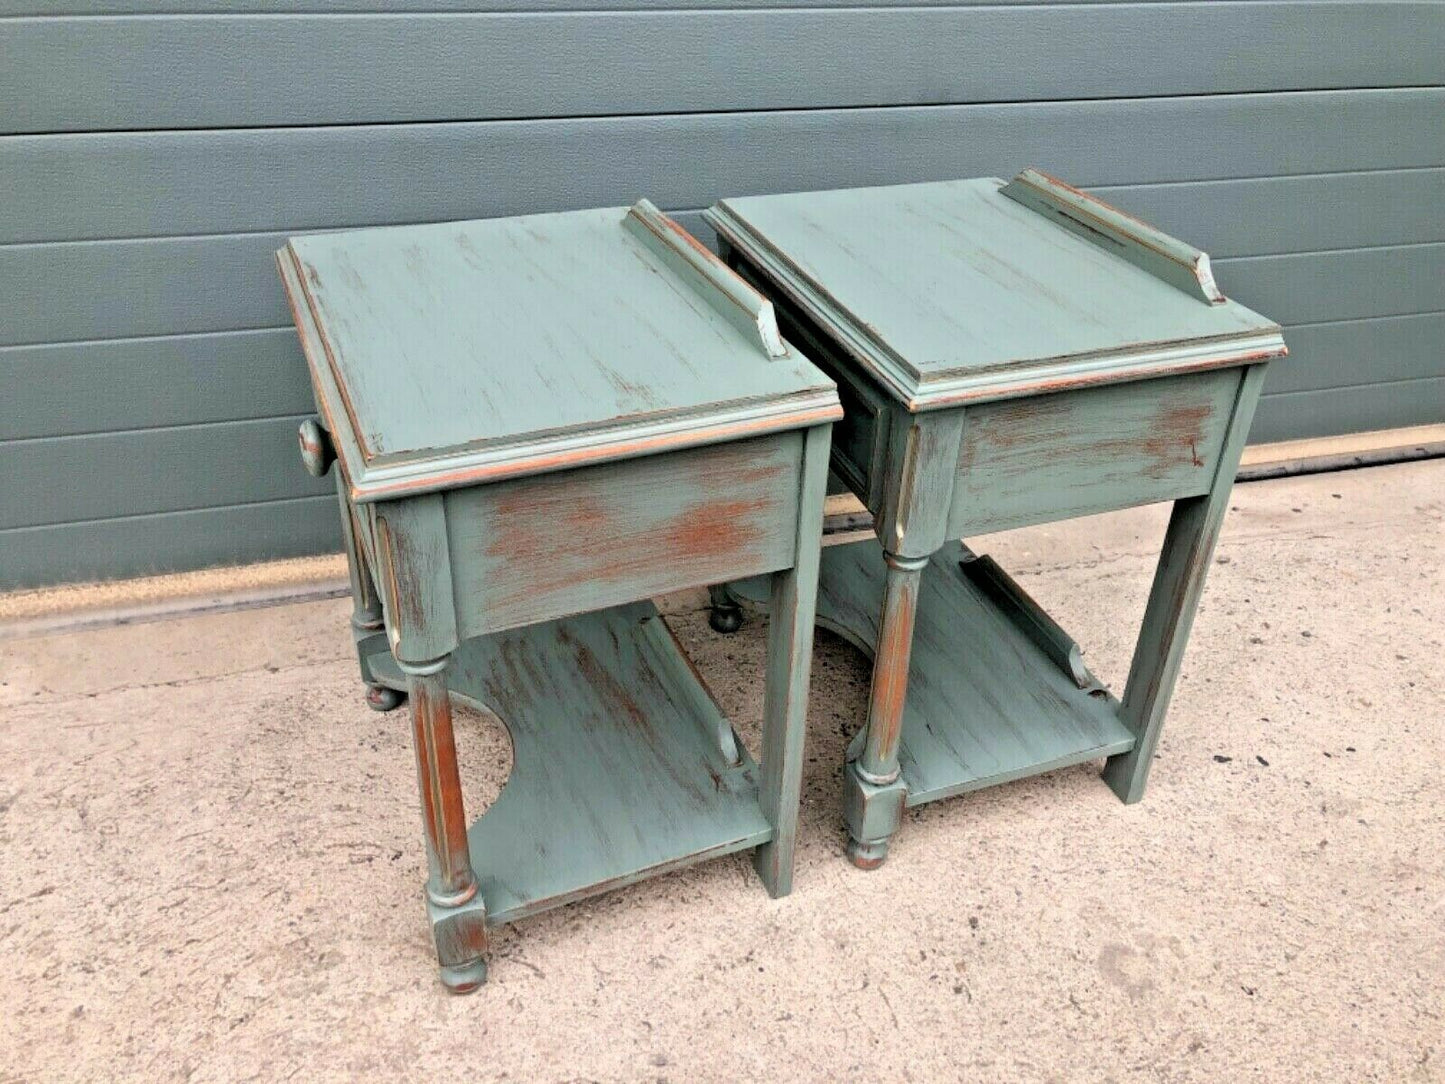 Handsome Pair Of Vintage Empire Style Bedside Tables / Lamp Tables ( SOLD )